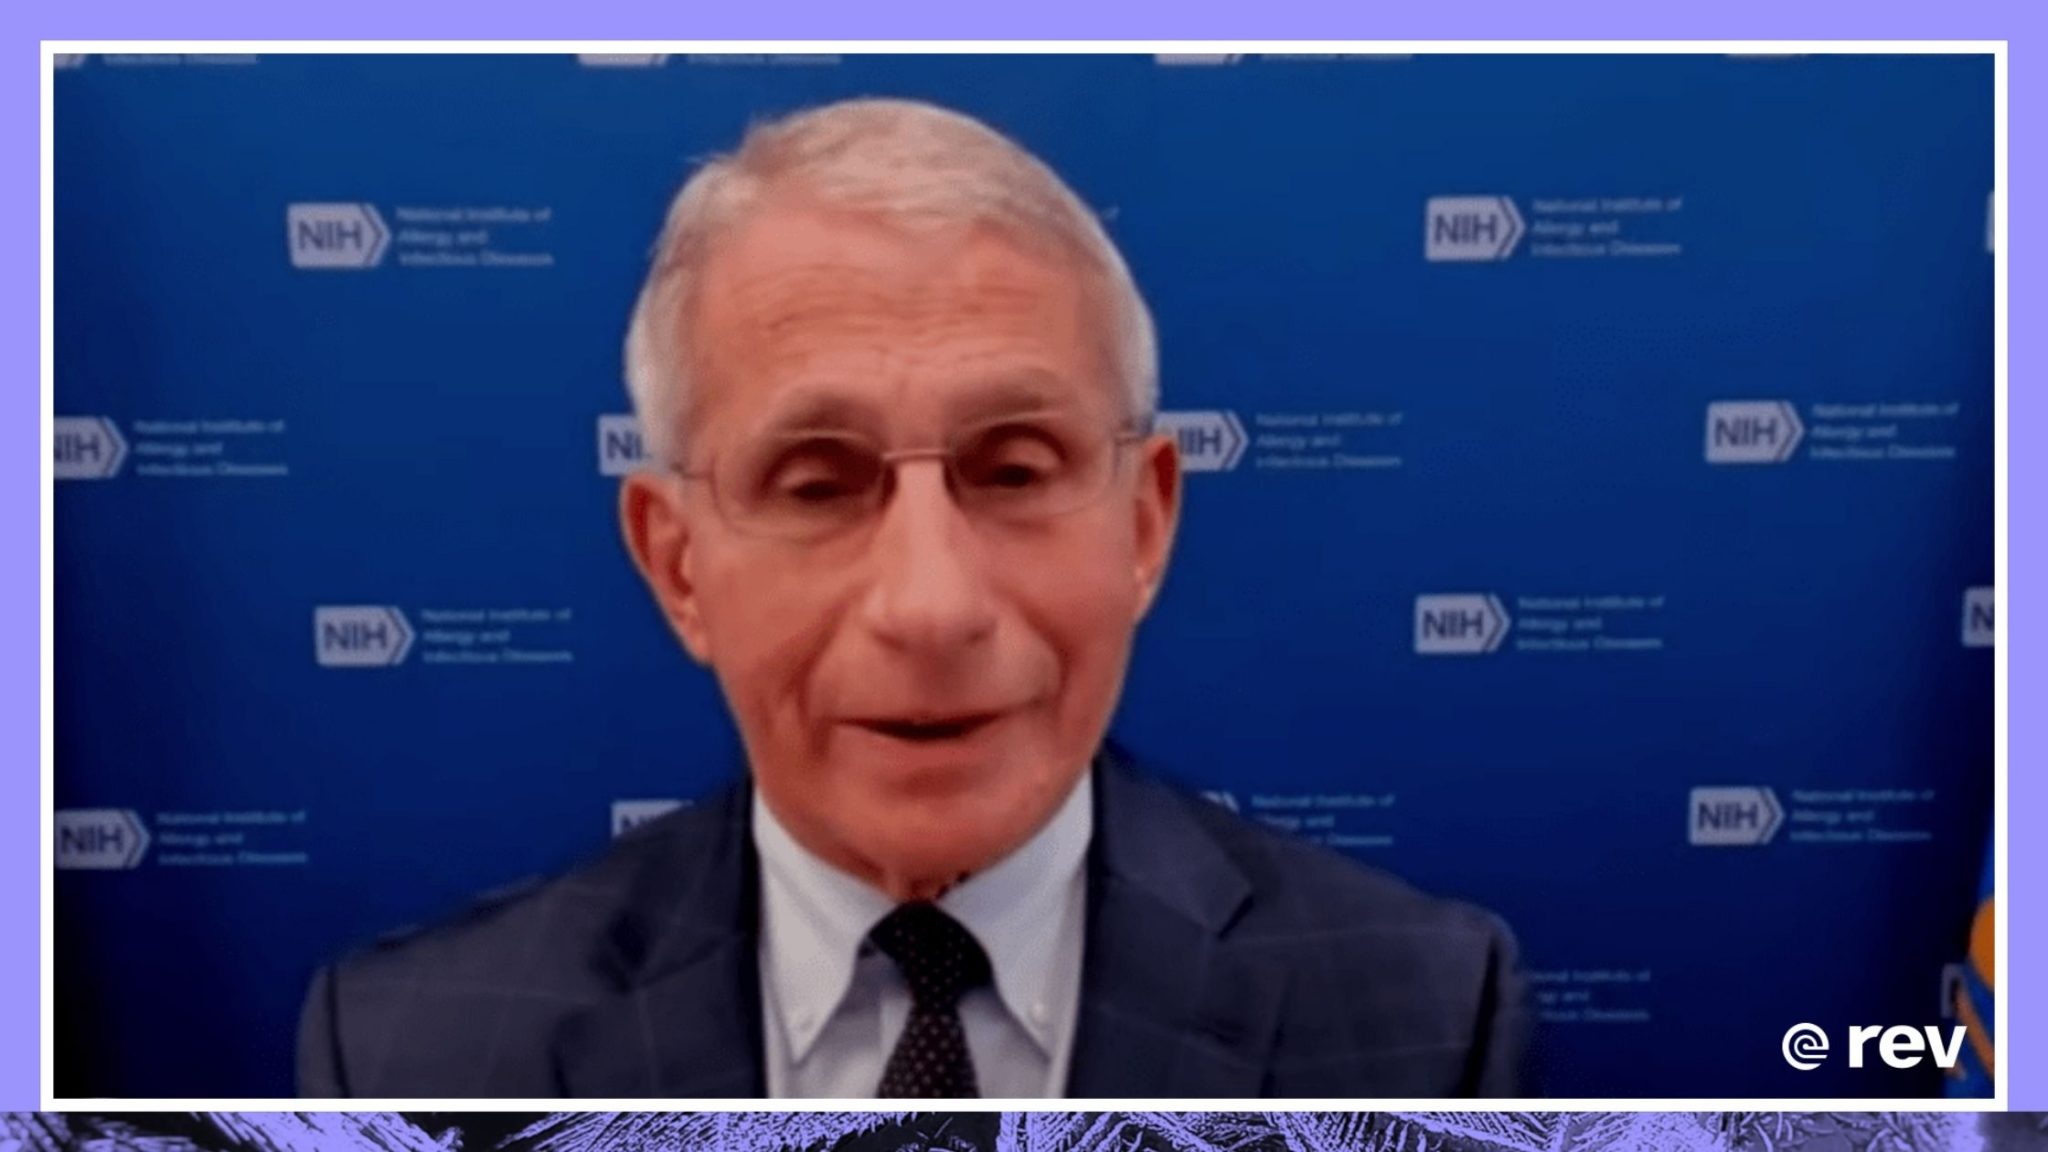 Dr. Fauci on why the U.S. is ‘out of the pandemic phase’ 4/23/22 Transcript